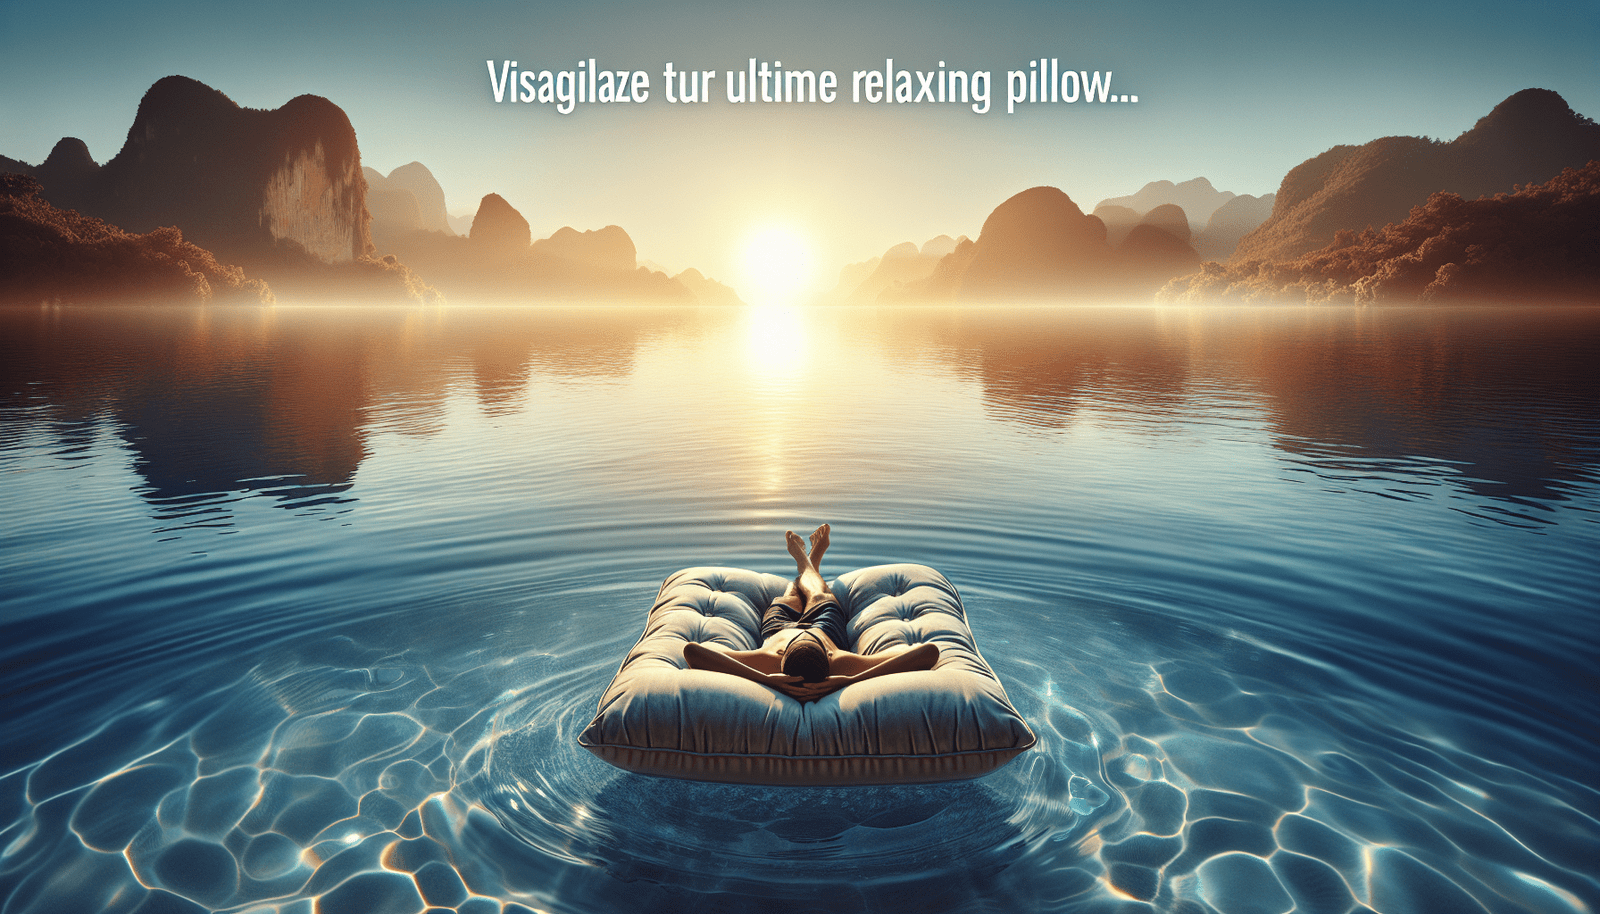 Top Rated Cold Plunge Floating Pillows For Relaxation